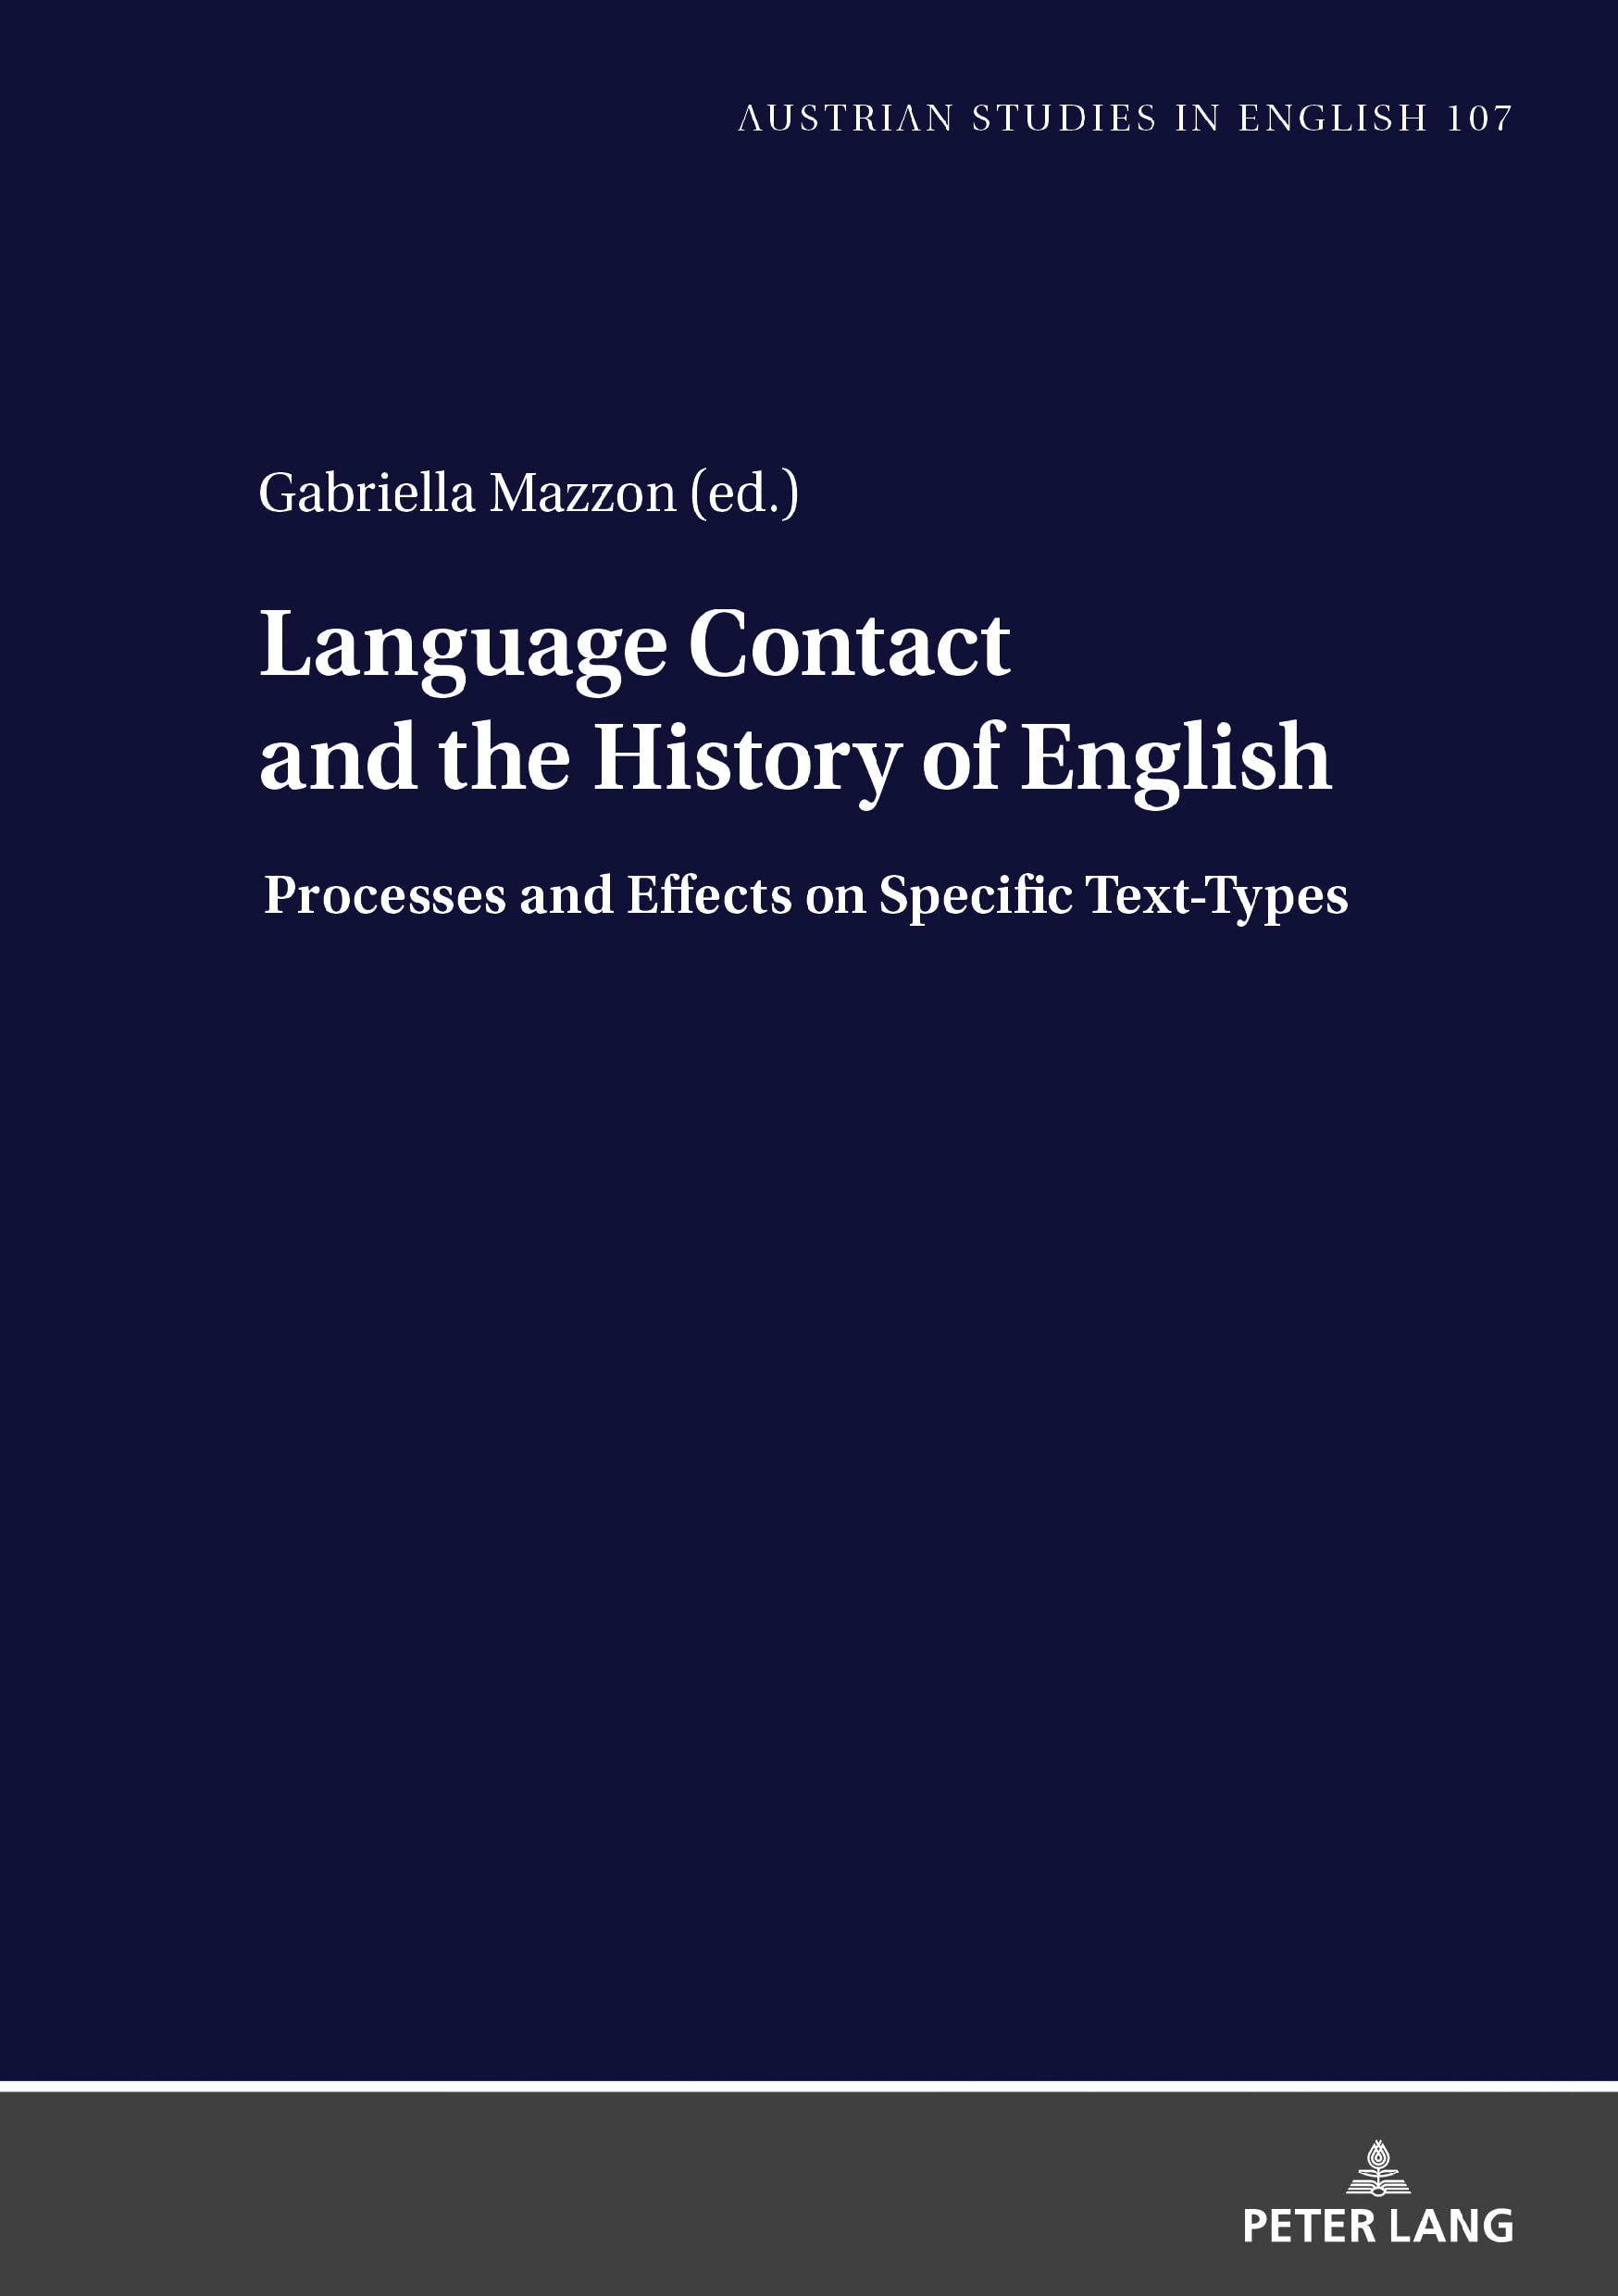 Language contact and the history of English lexicon : processes and effects on specific text-types. edited by / ASE-H Austrian Studies in English ; ; vol. 107 - Mazzon, Gabriella and 1962-